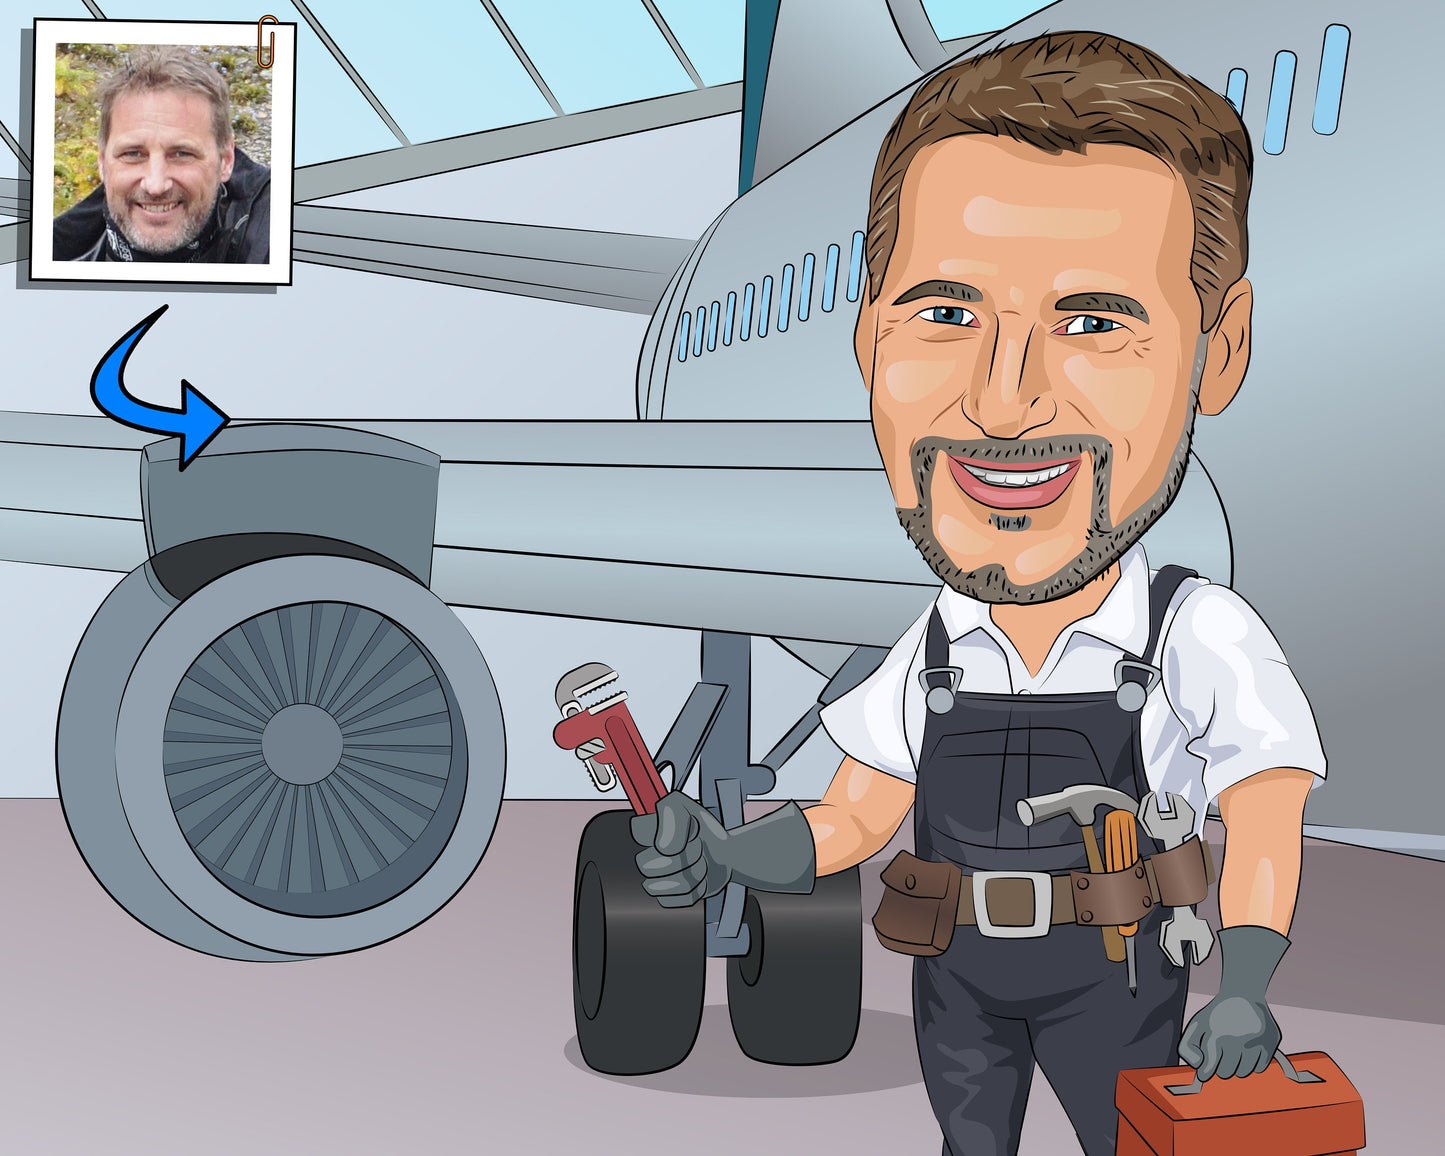 Aircraft Mechanic Gift - Custom Caricature Portrait From Your Photo/airplane mechanic